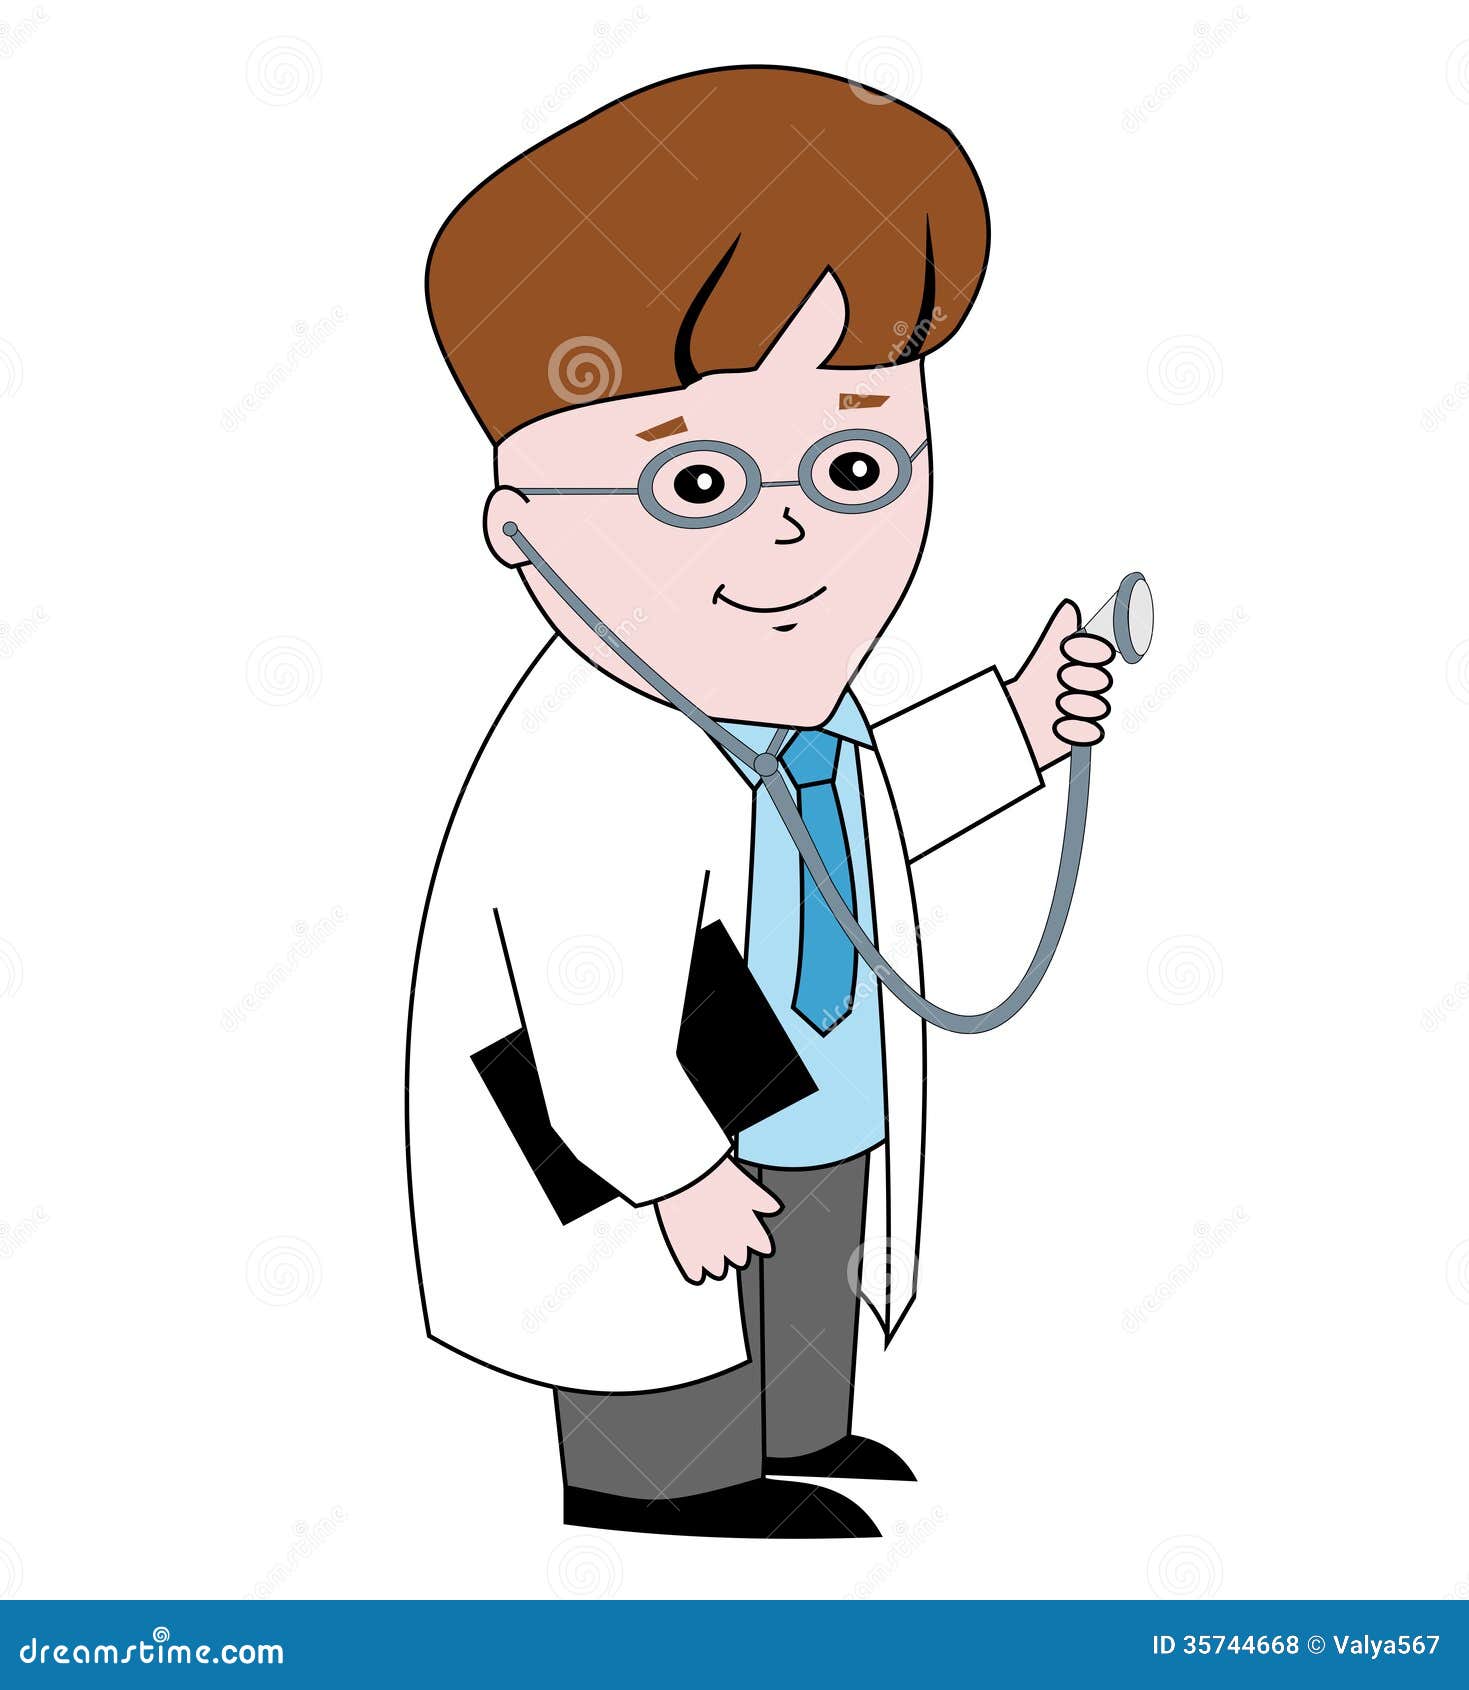 doctor clipart free download - photo #43